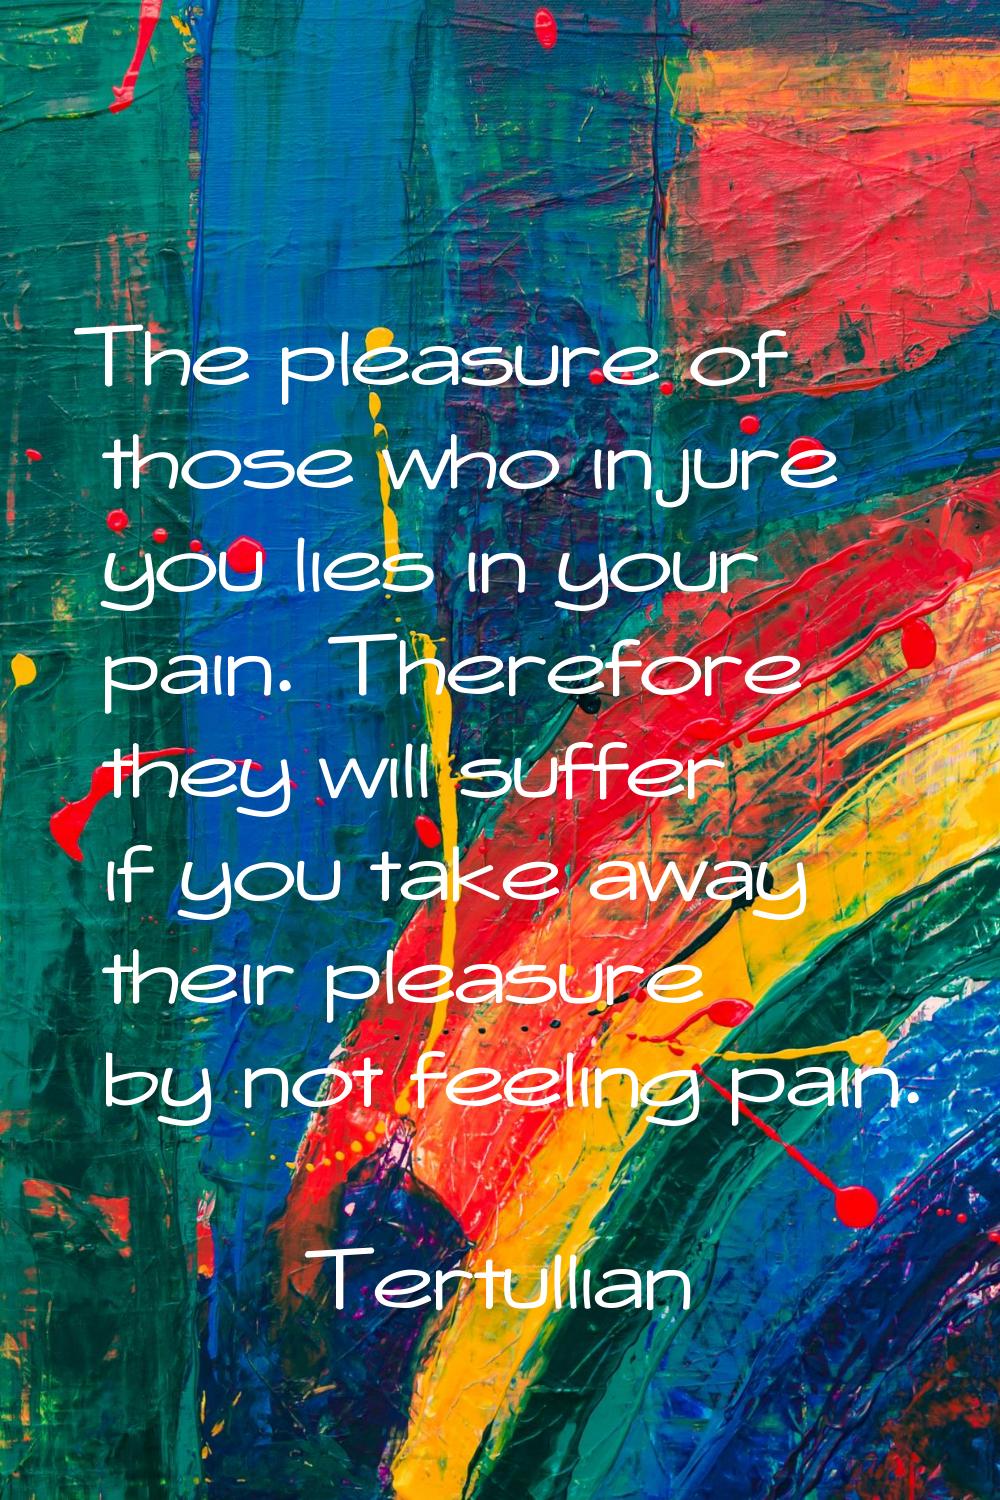 The pleasure of those who injure you lies in your pain. Therefore they will suffer if you take away